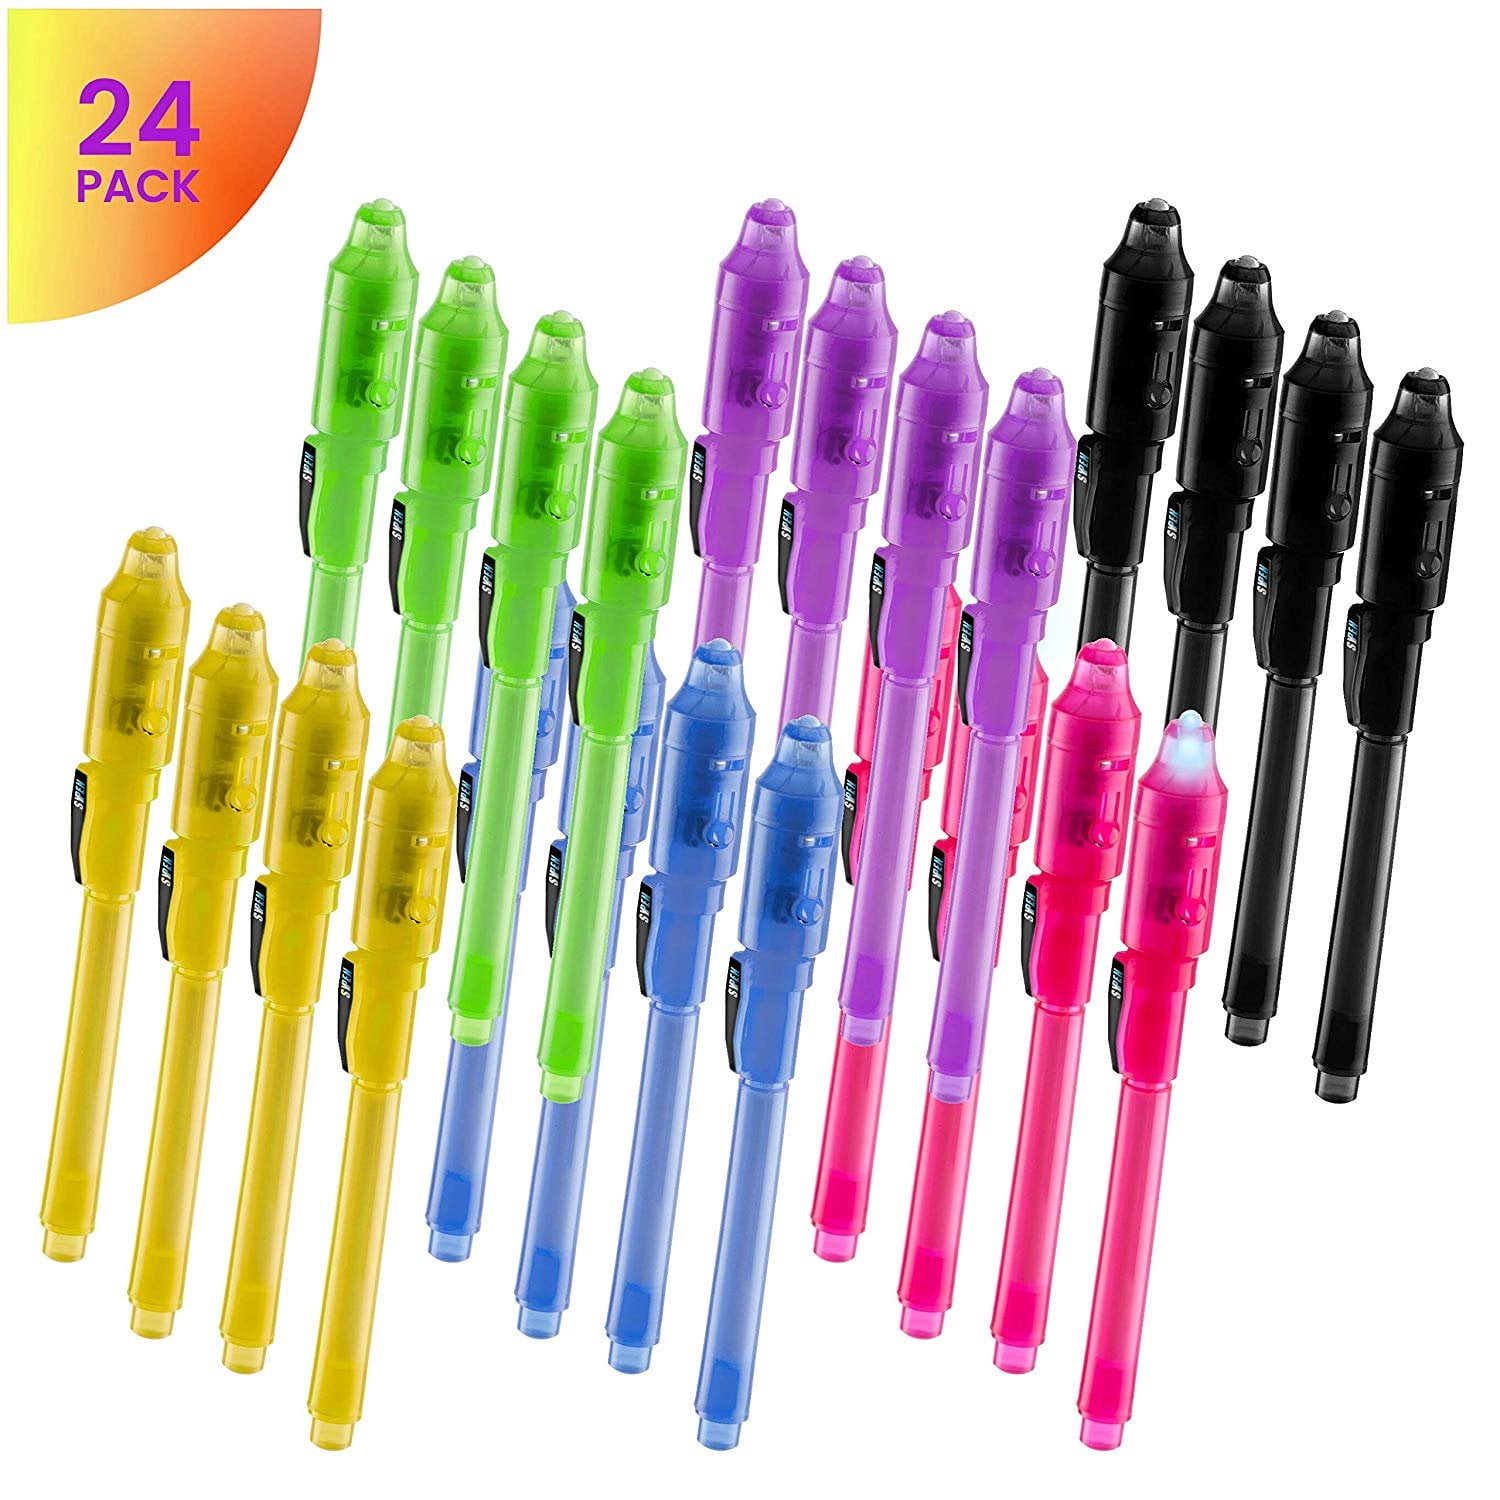 Random Color STOBOK 8pcs Invisible Ink Pen Secret Spy Message Disappearing Writer Currency Checking Pen with UV Light 